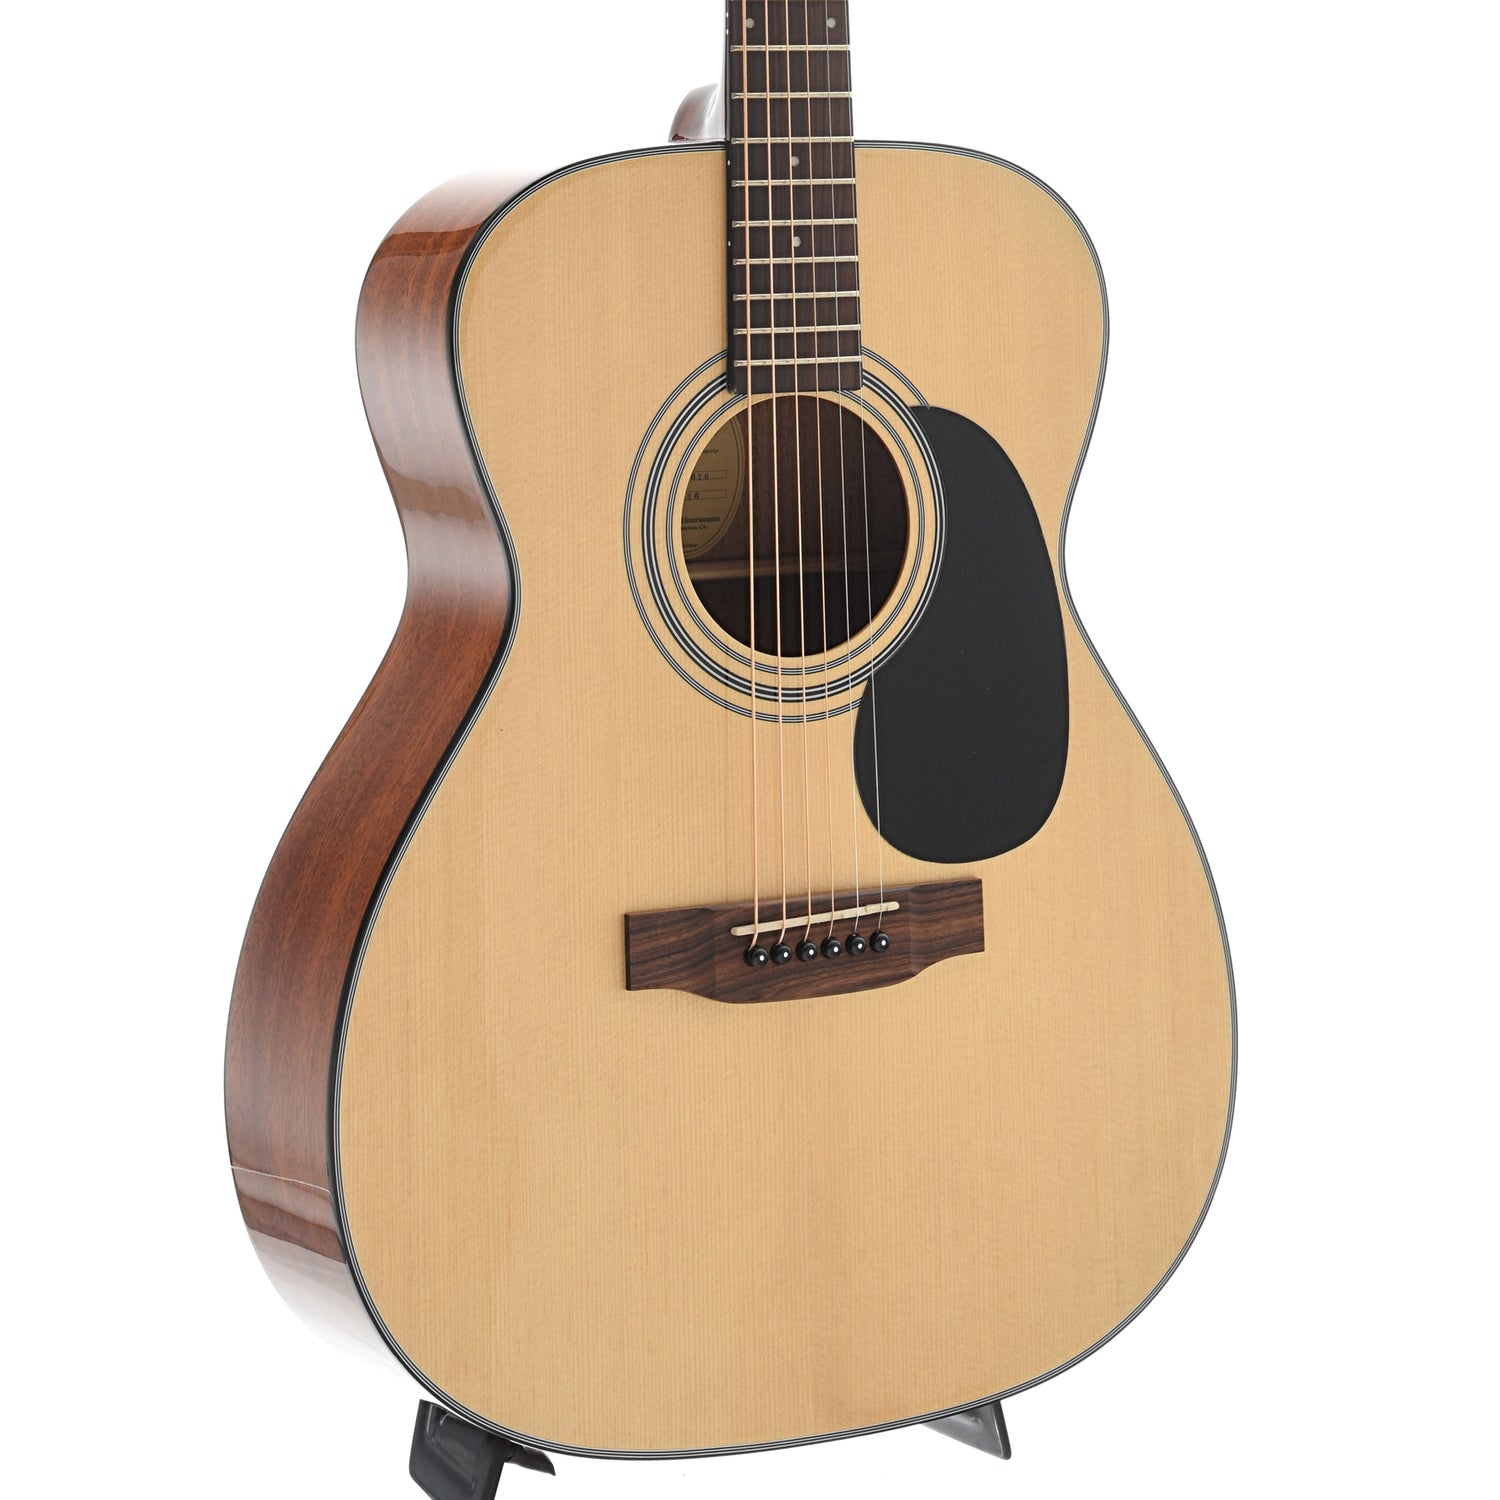 Image 5 of * Elderly Instruments "000" Guitar Outfit - SKU# DEAL2 : Product Type Flat-top Guitars : Elderly Instruments